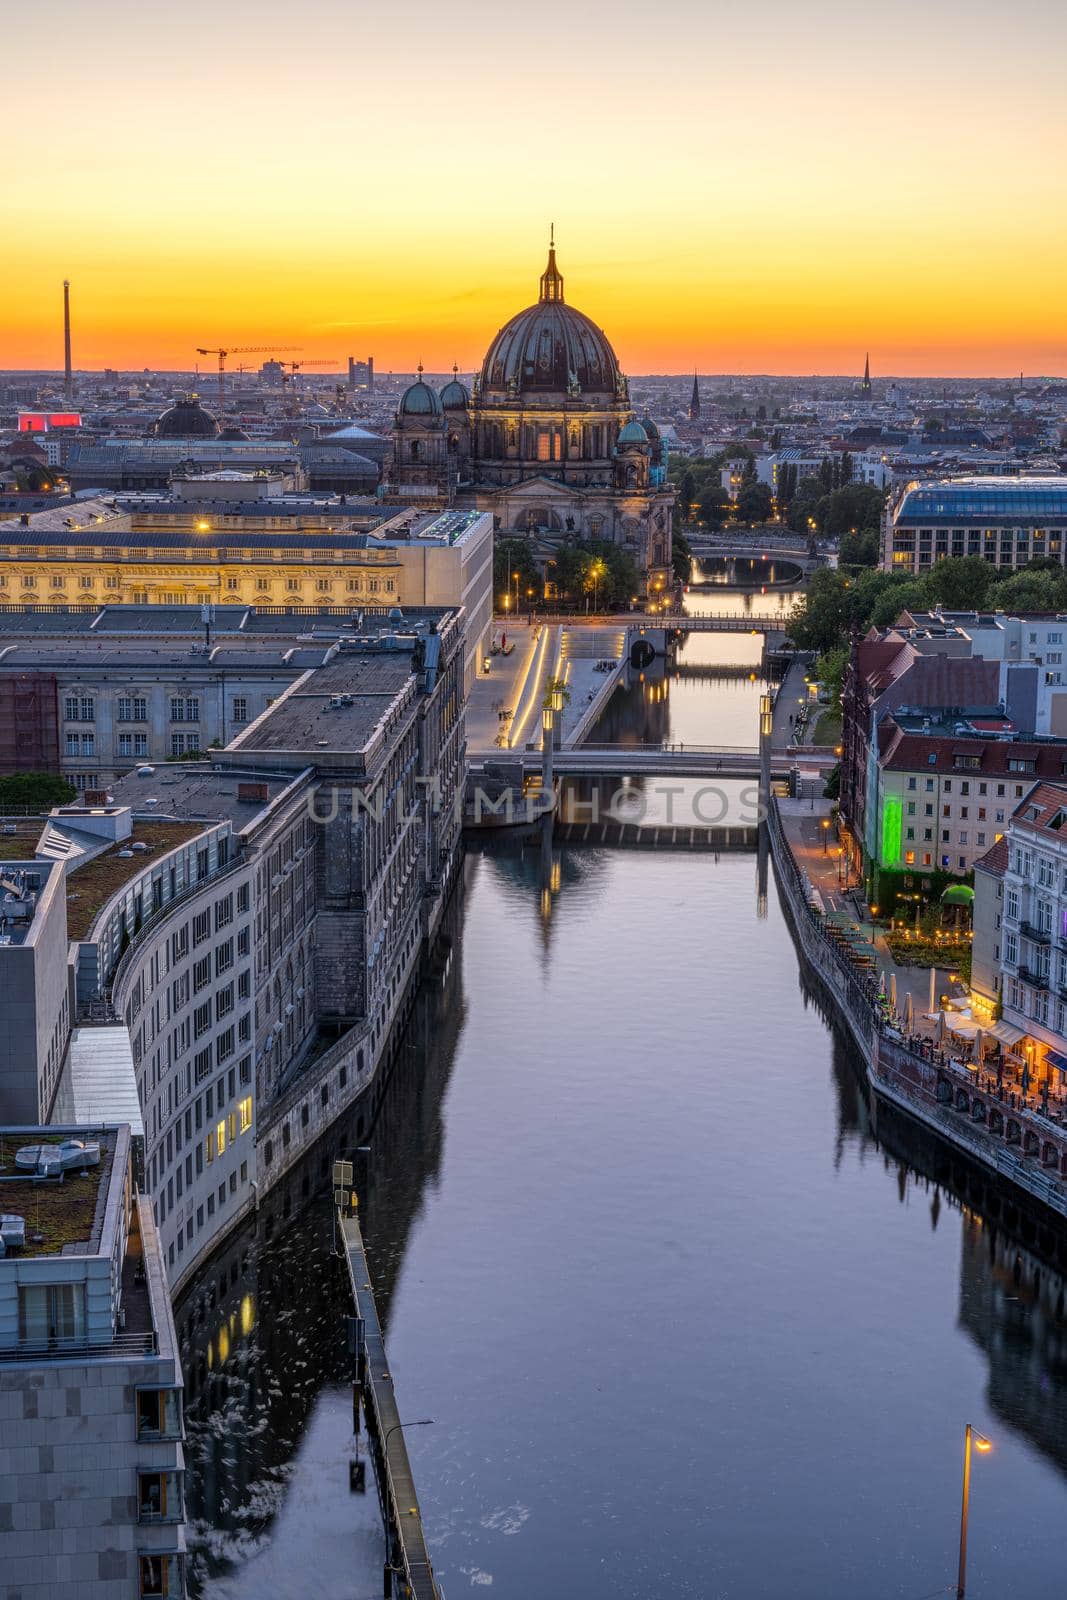 Sunset at the river Spree in Berlin by elxeneize